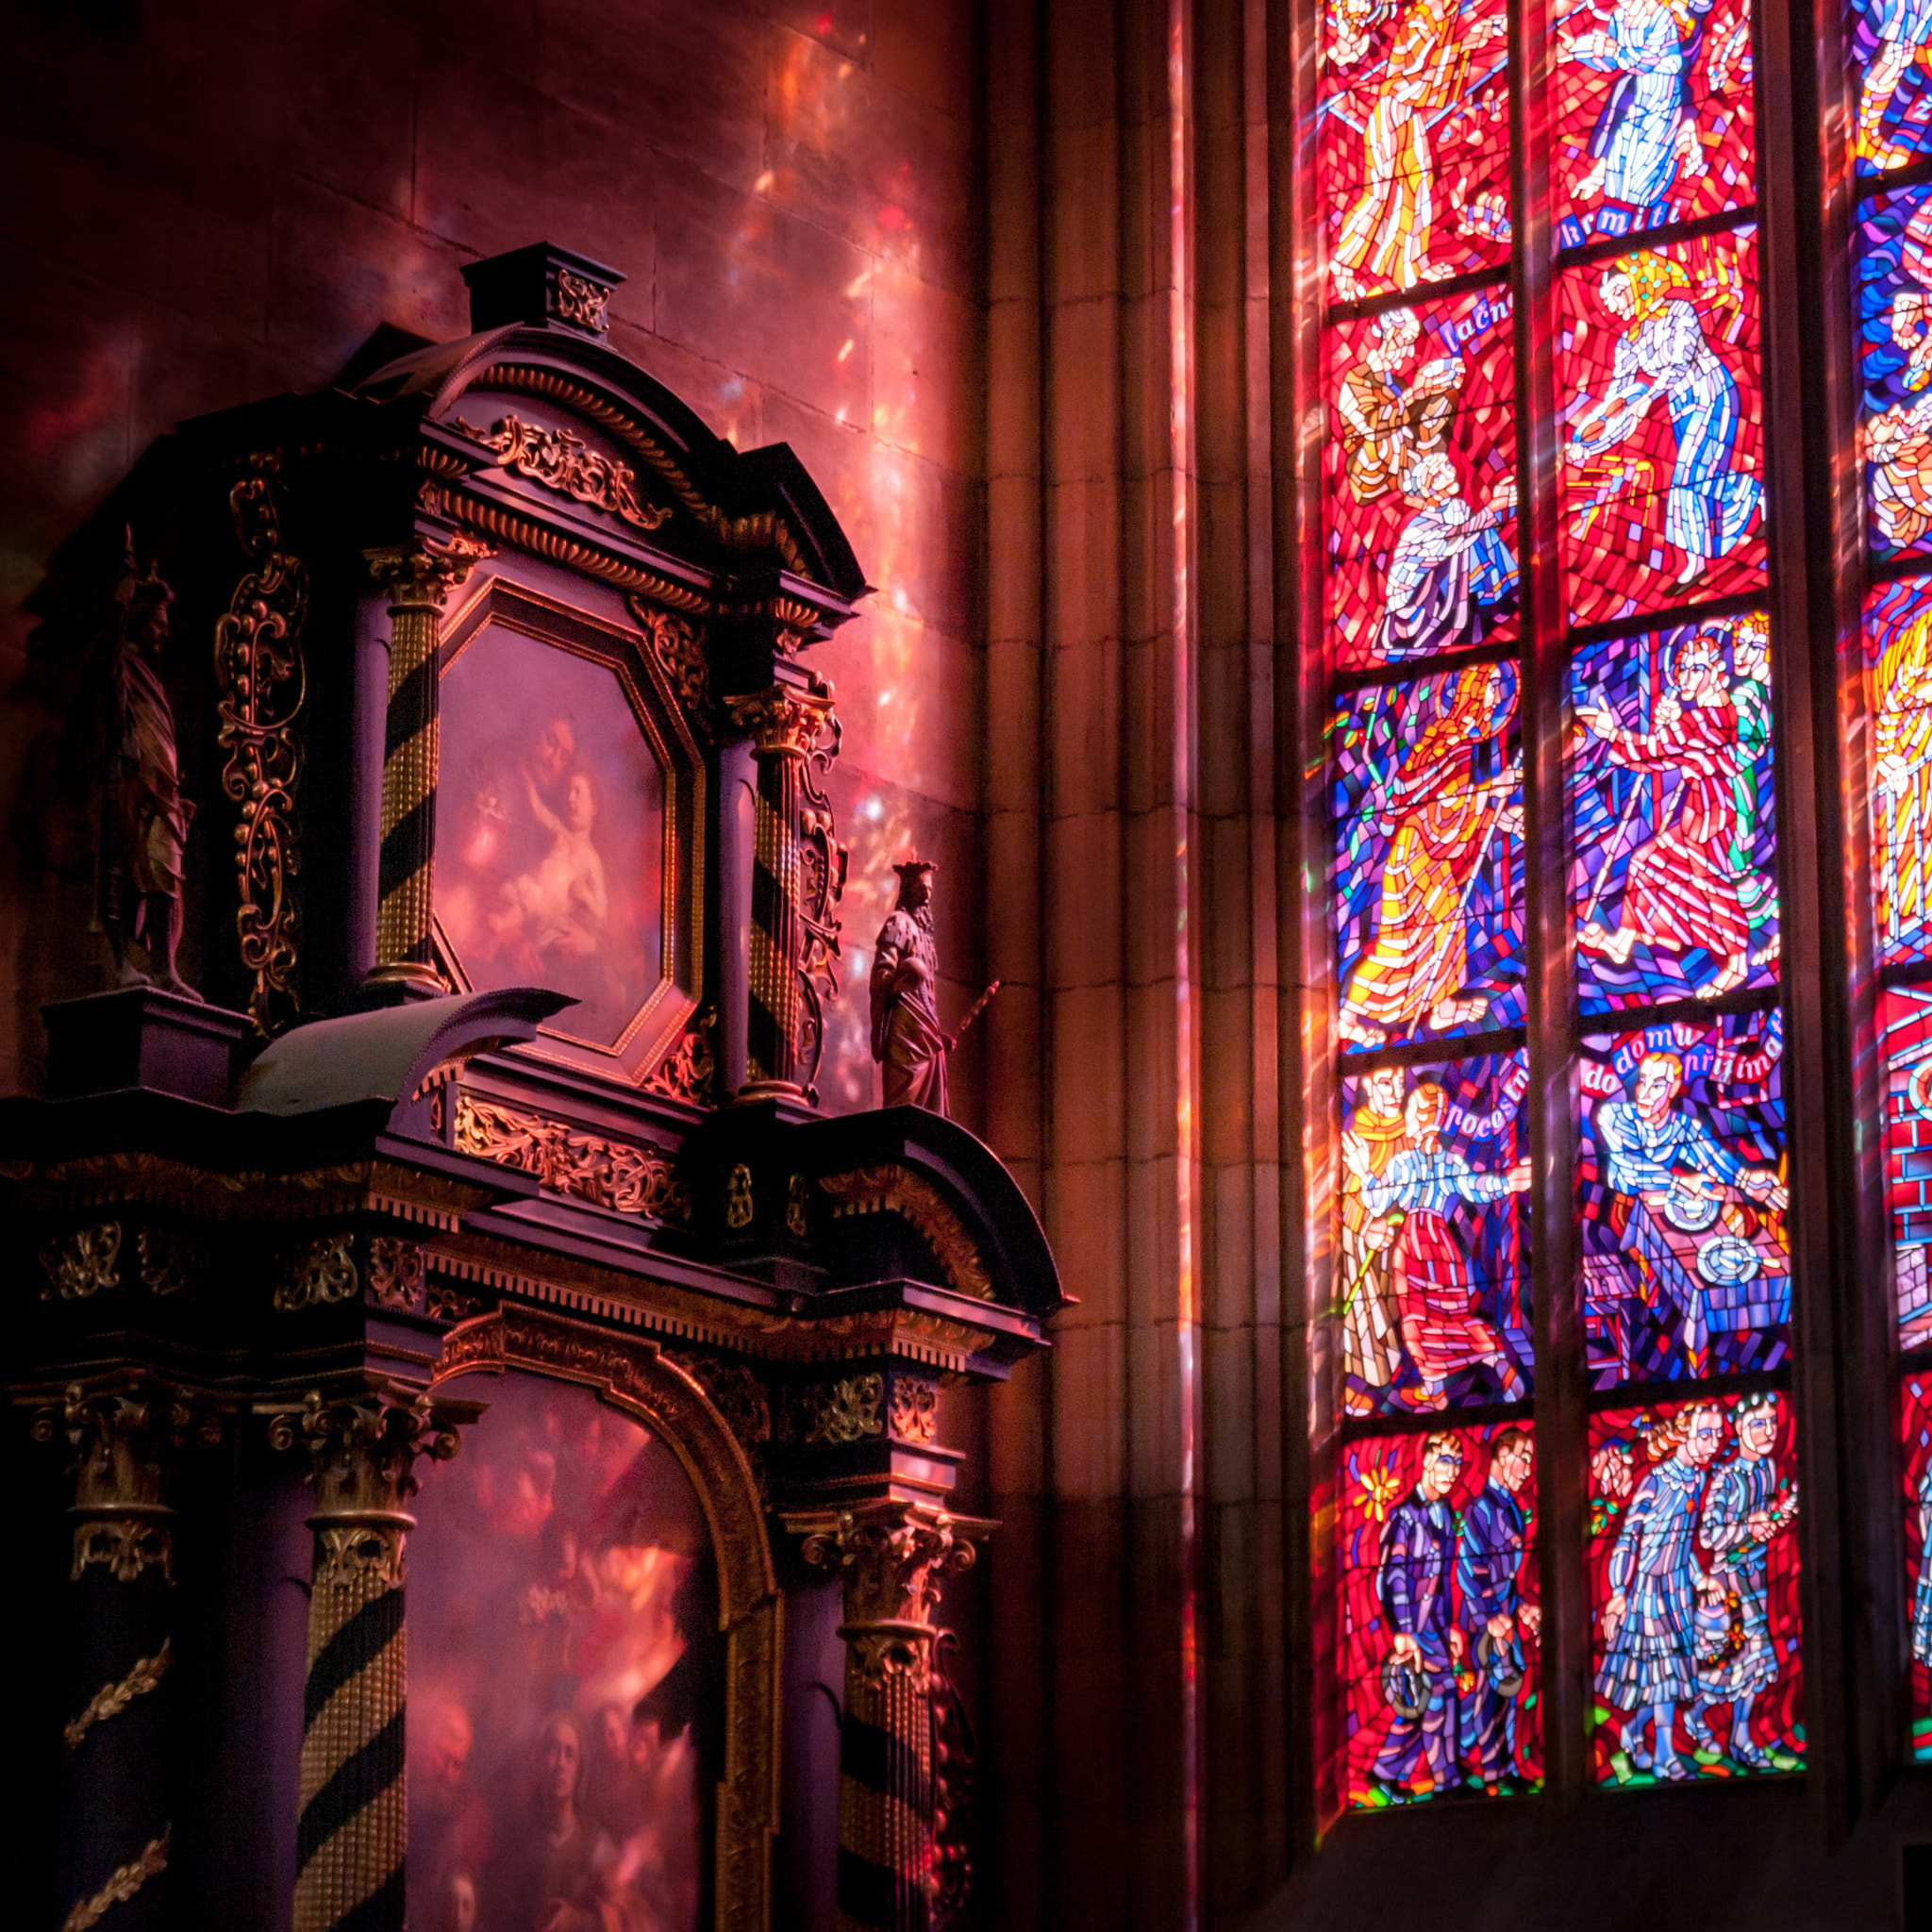 Pentax K20D + Sigma sample photo. Inside st. vitus cathedral photography